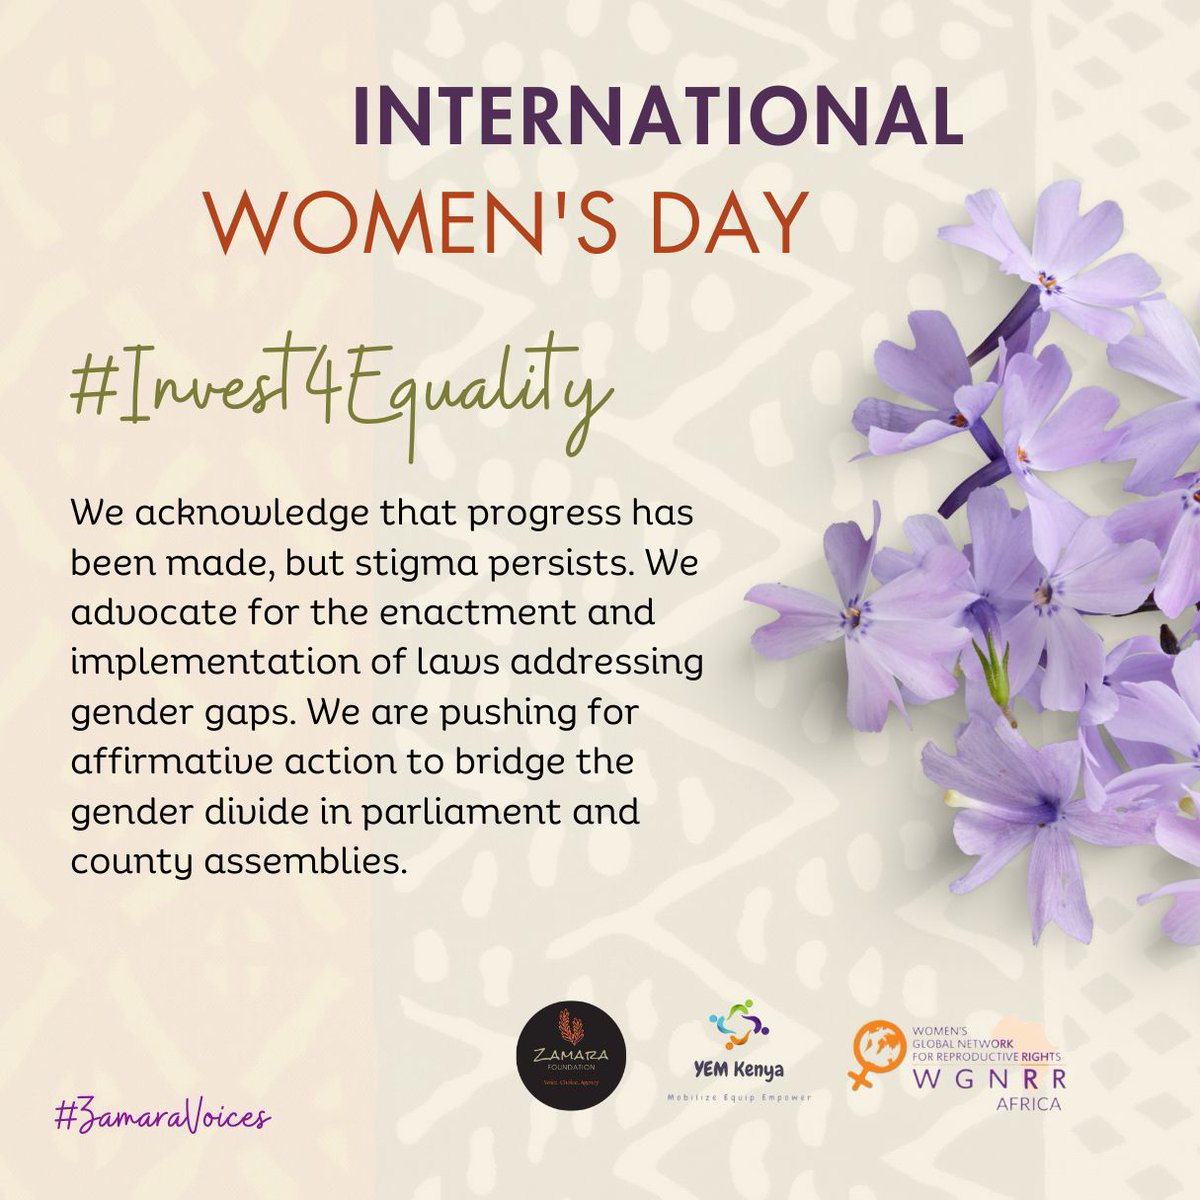 For the women who fought this fight before us,for the women of now and the future generations of women,we need to invest for equality and strategically work to put an end to stigmatization and other societal norms that are oppressive to women.#Invest4Equality 

@Zamara_fdn